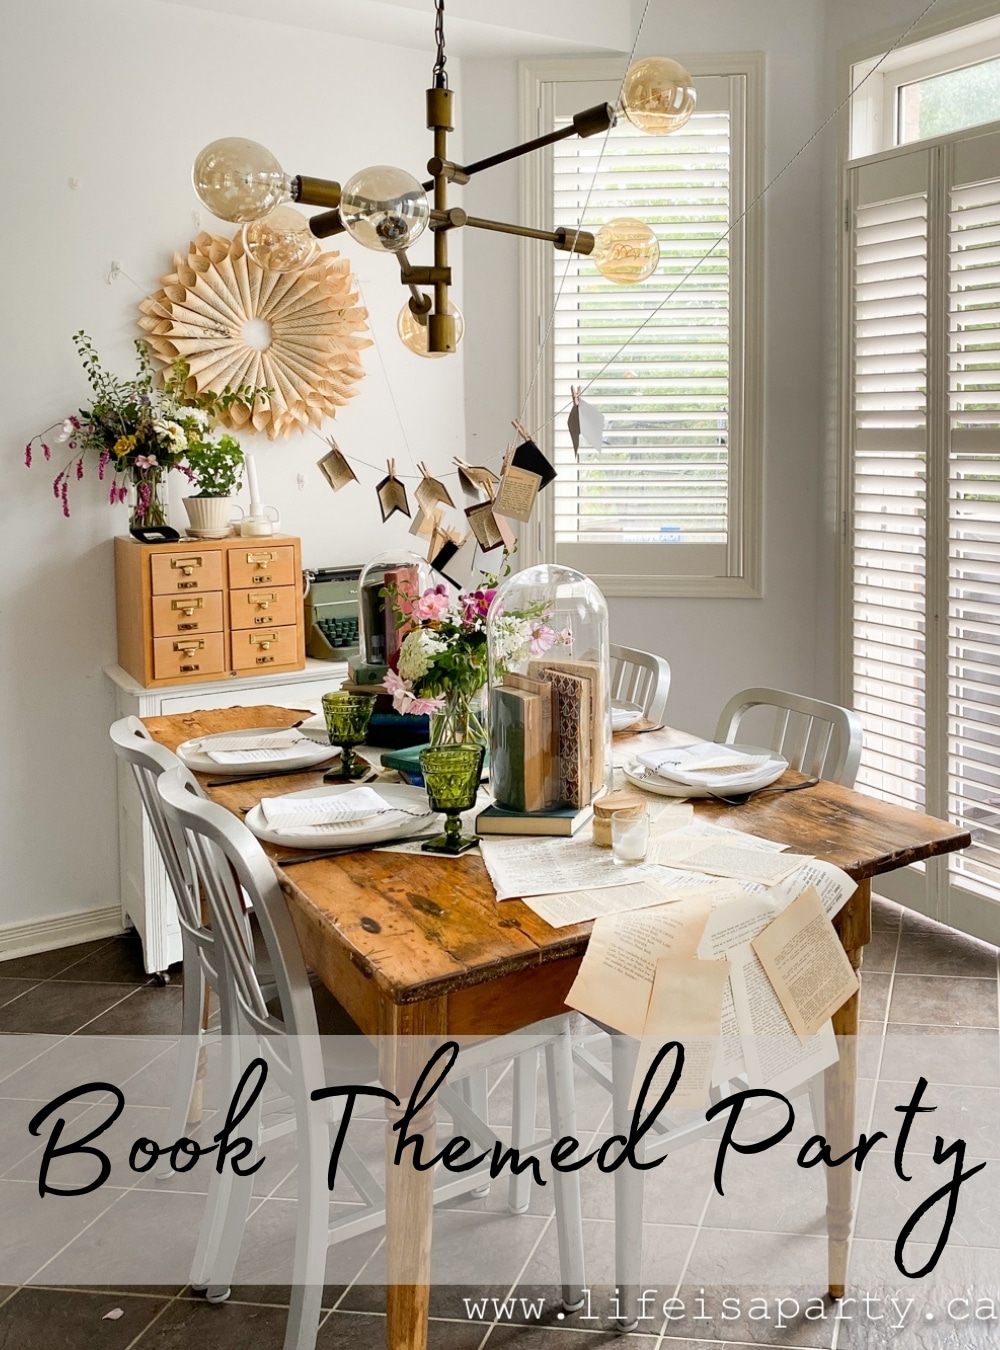 Book Themed Party